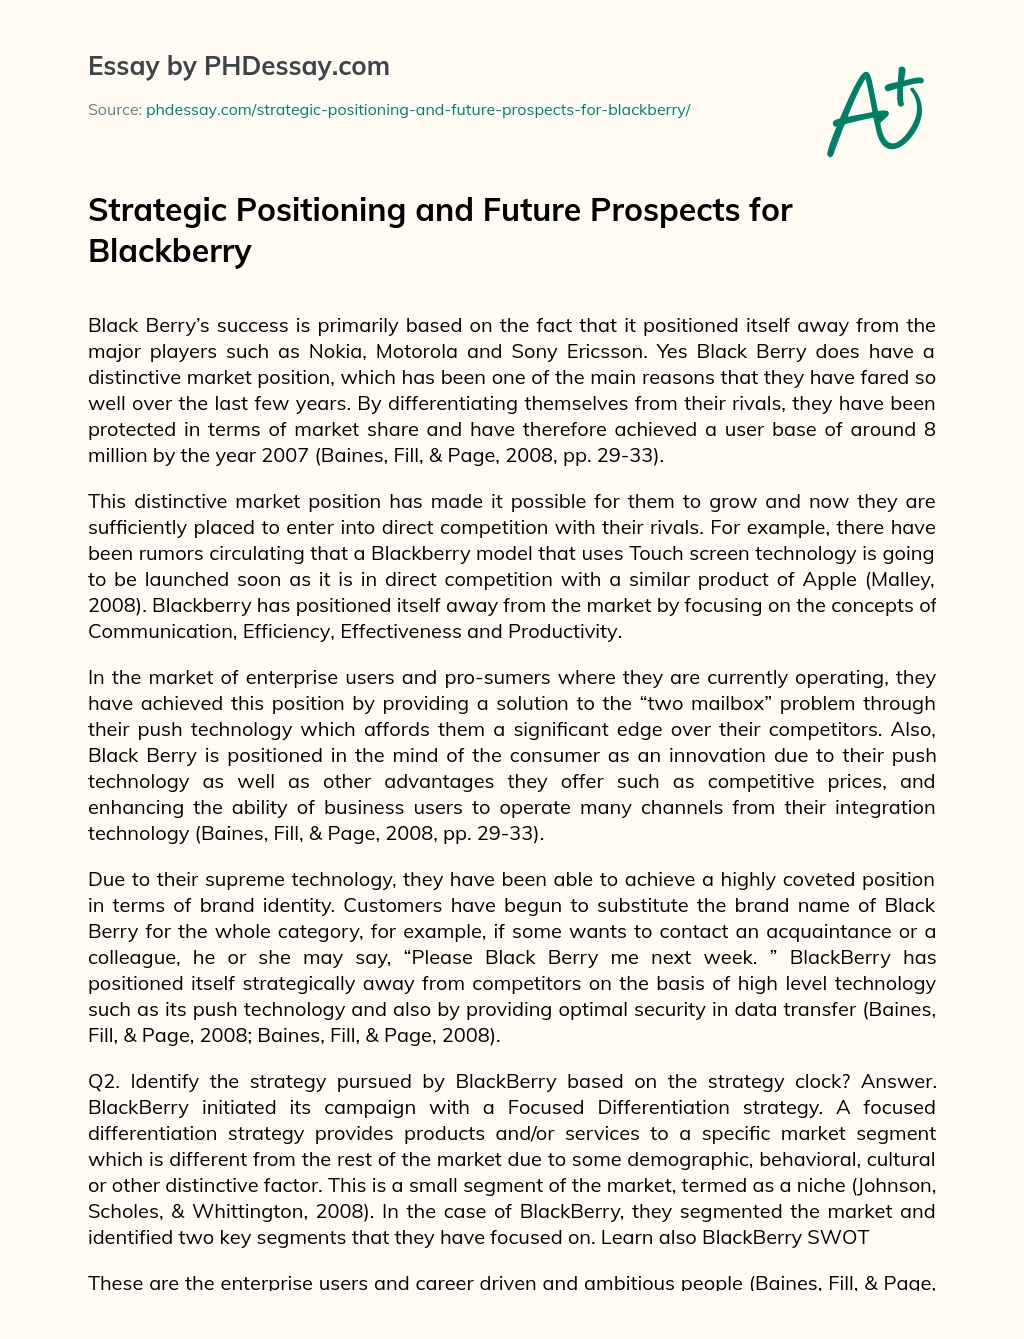 Strategic Positioning and Future Prospects for Blackberry essay